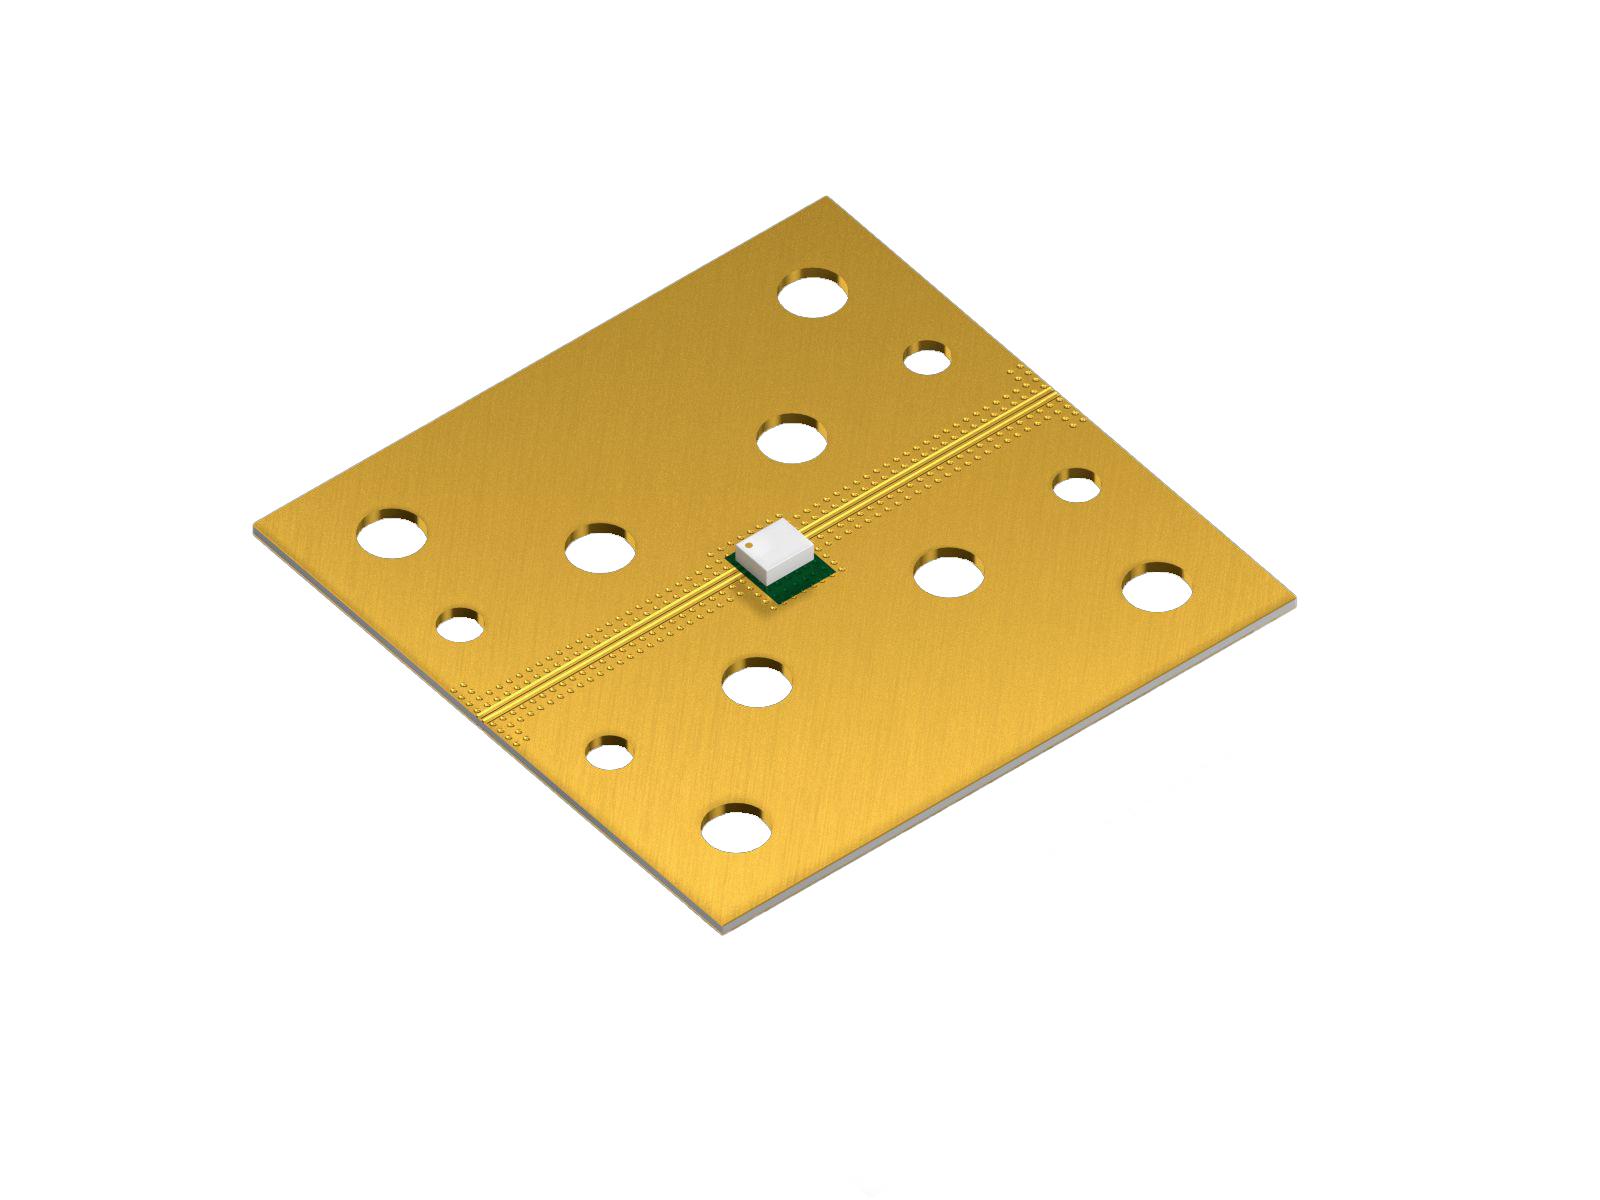 the part number is MMCB2527G6T-0040A1 SAMPLE WITH TEST BOARD